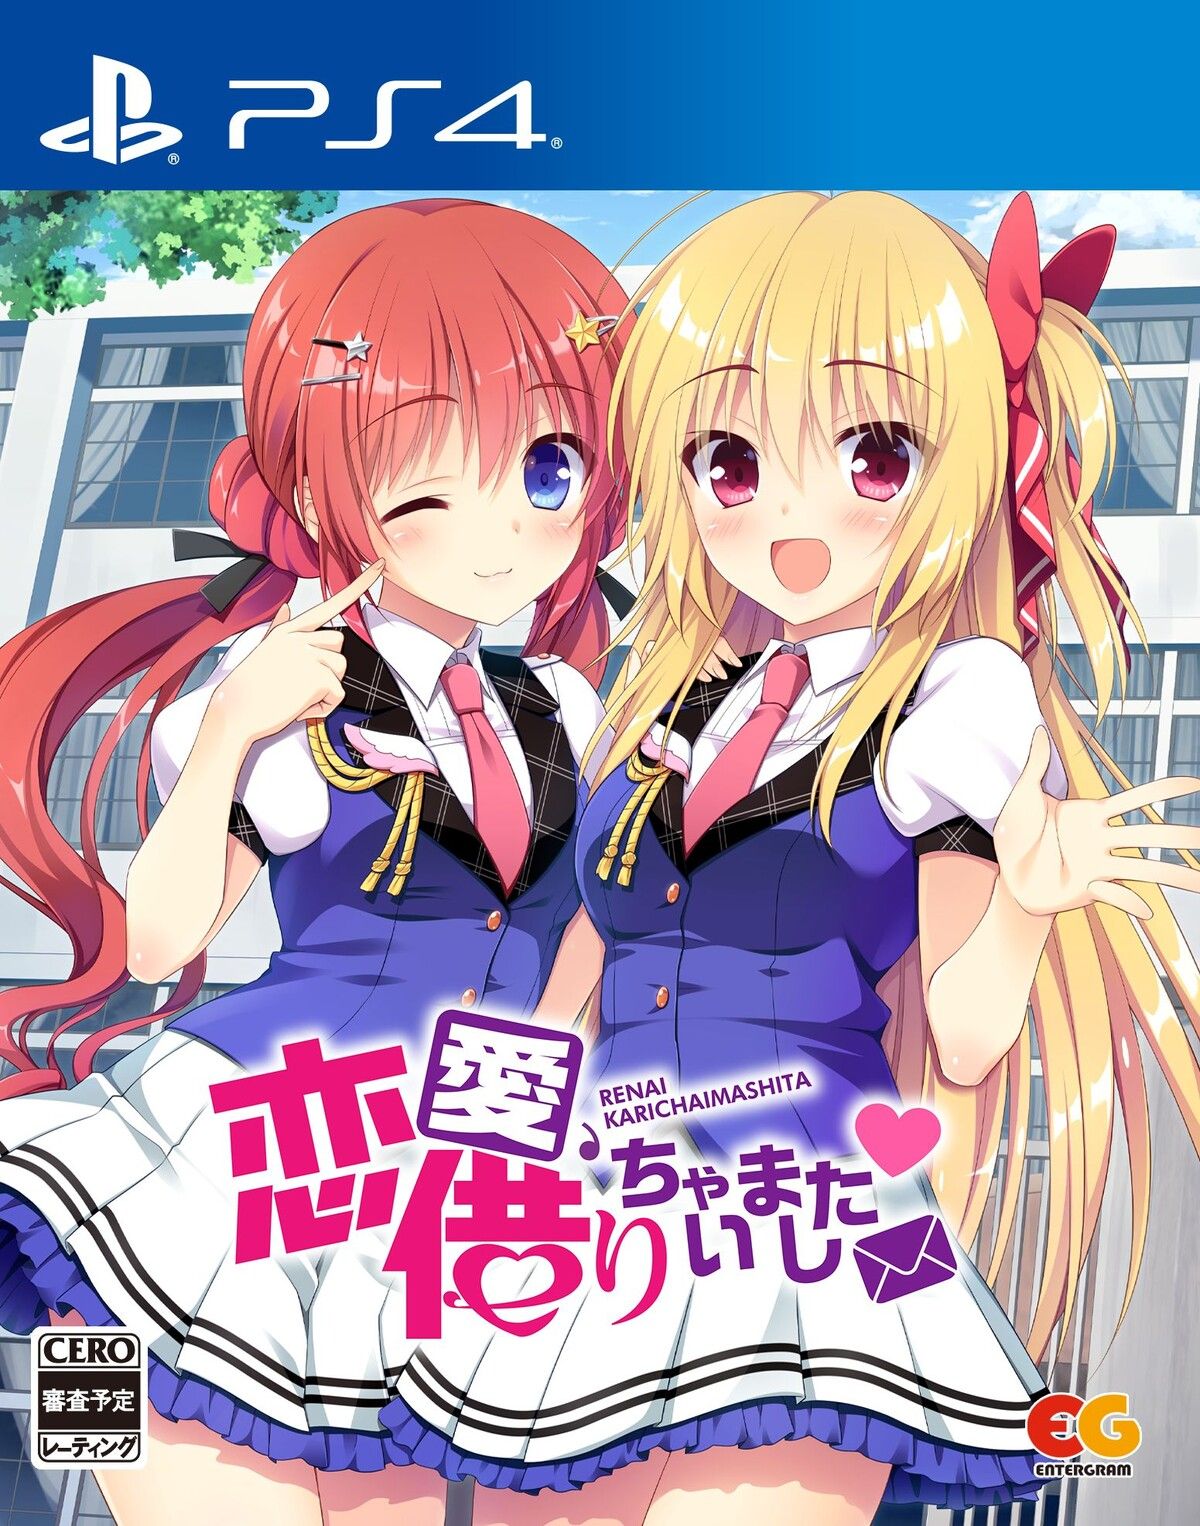 PS4 / switch version Love, borrowed girl's erotic and skirt raise, etc. 2